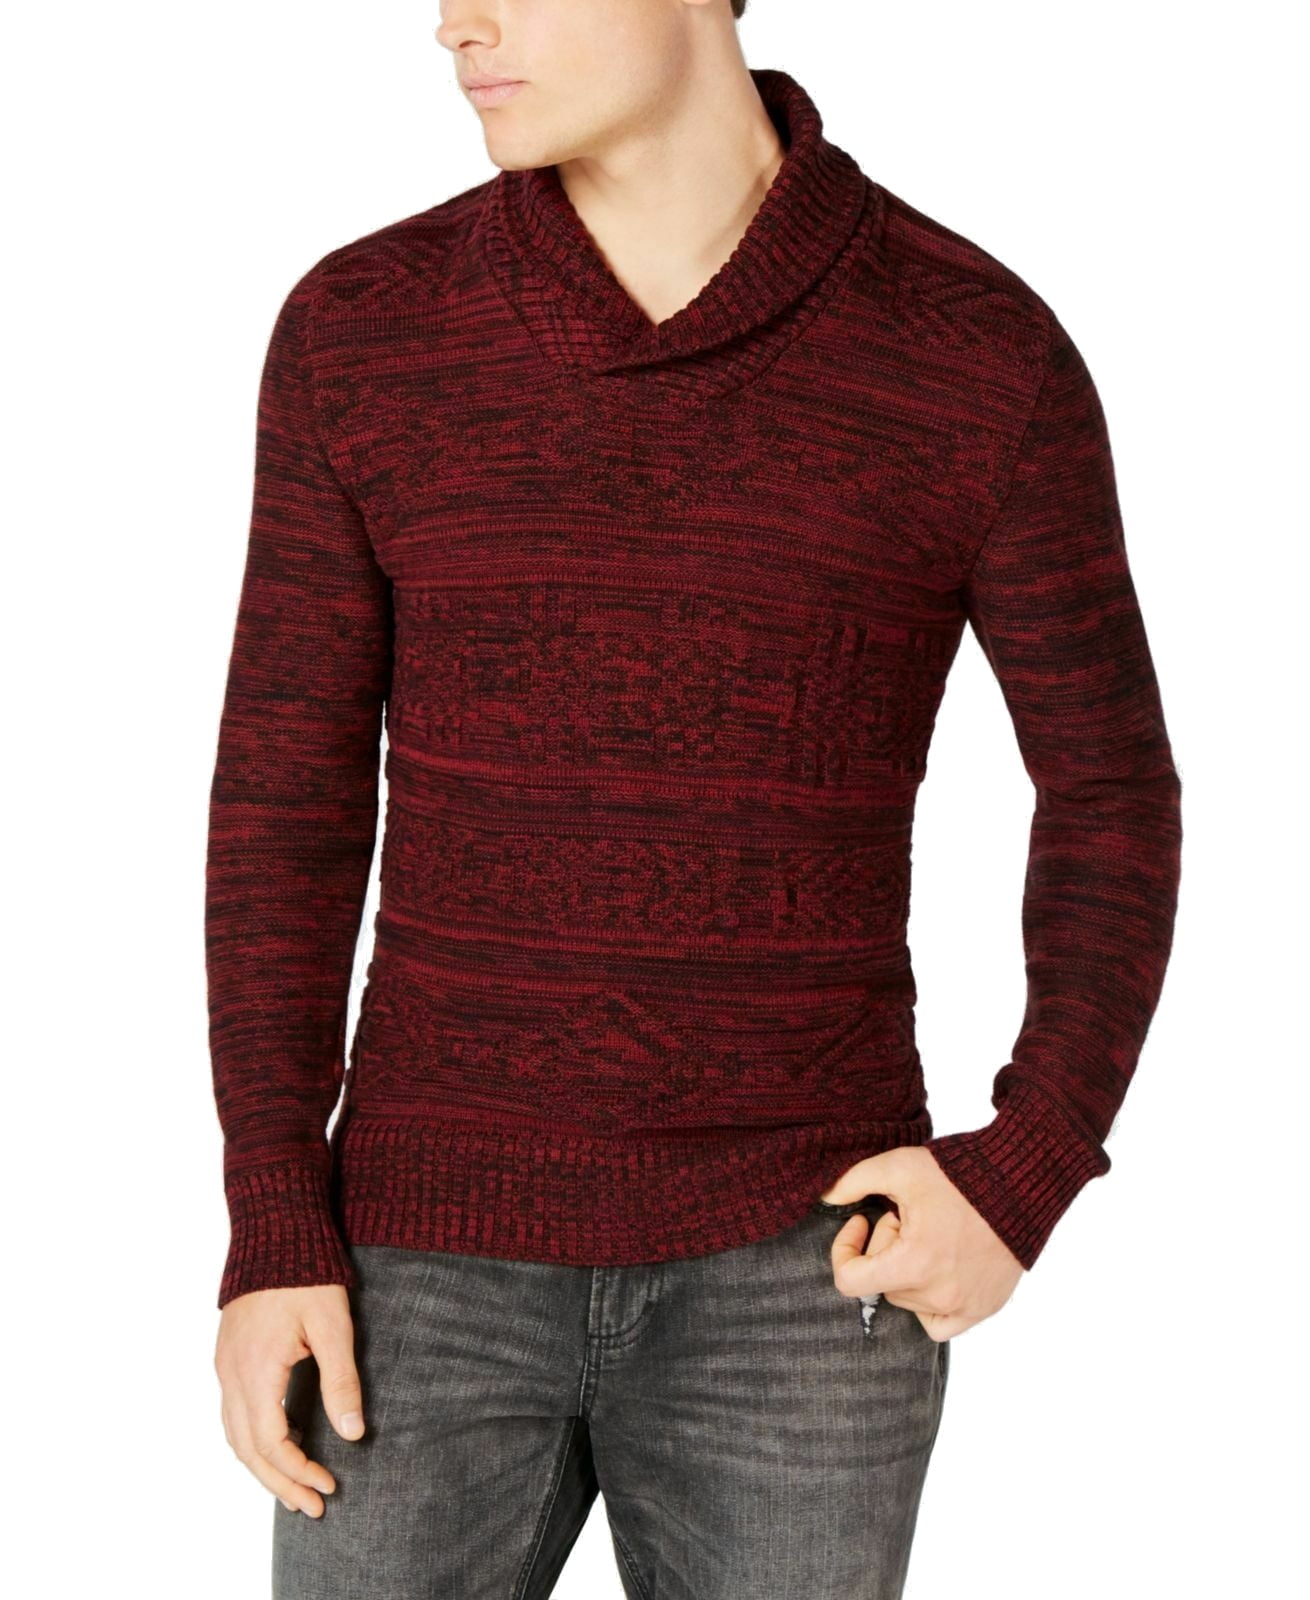 American Rag Sweaters - Mens Sweater Shawl Collar Space Dye Pullover ...